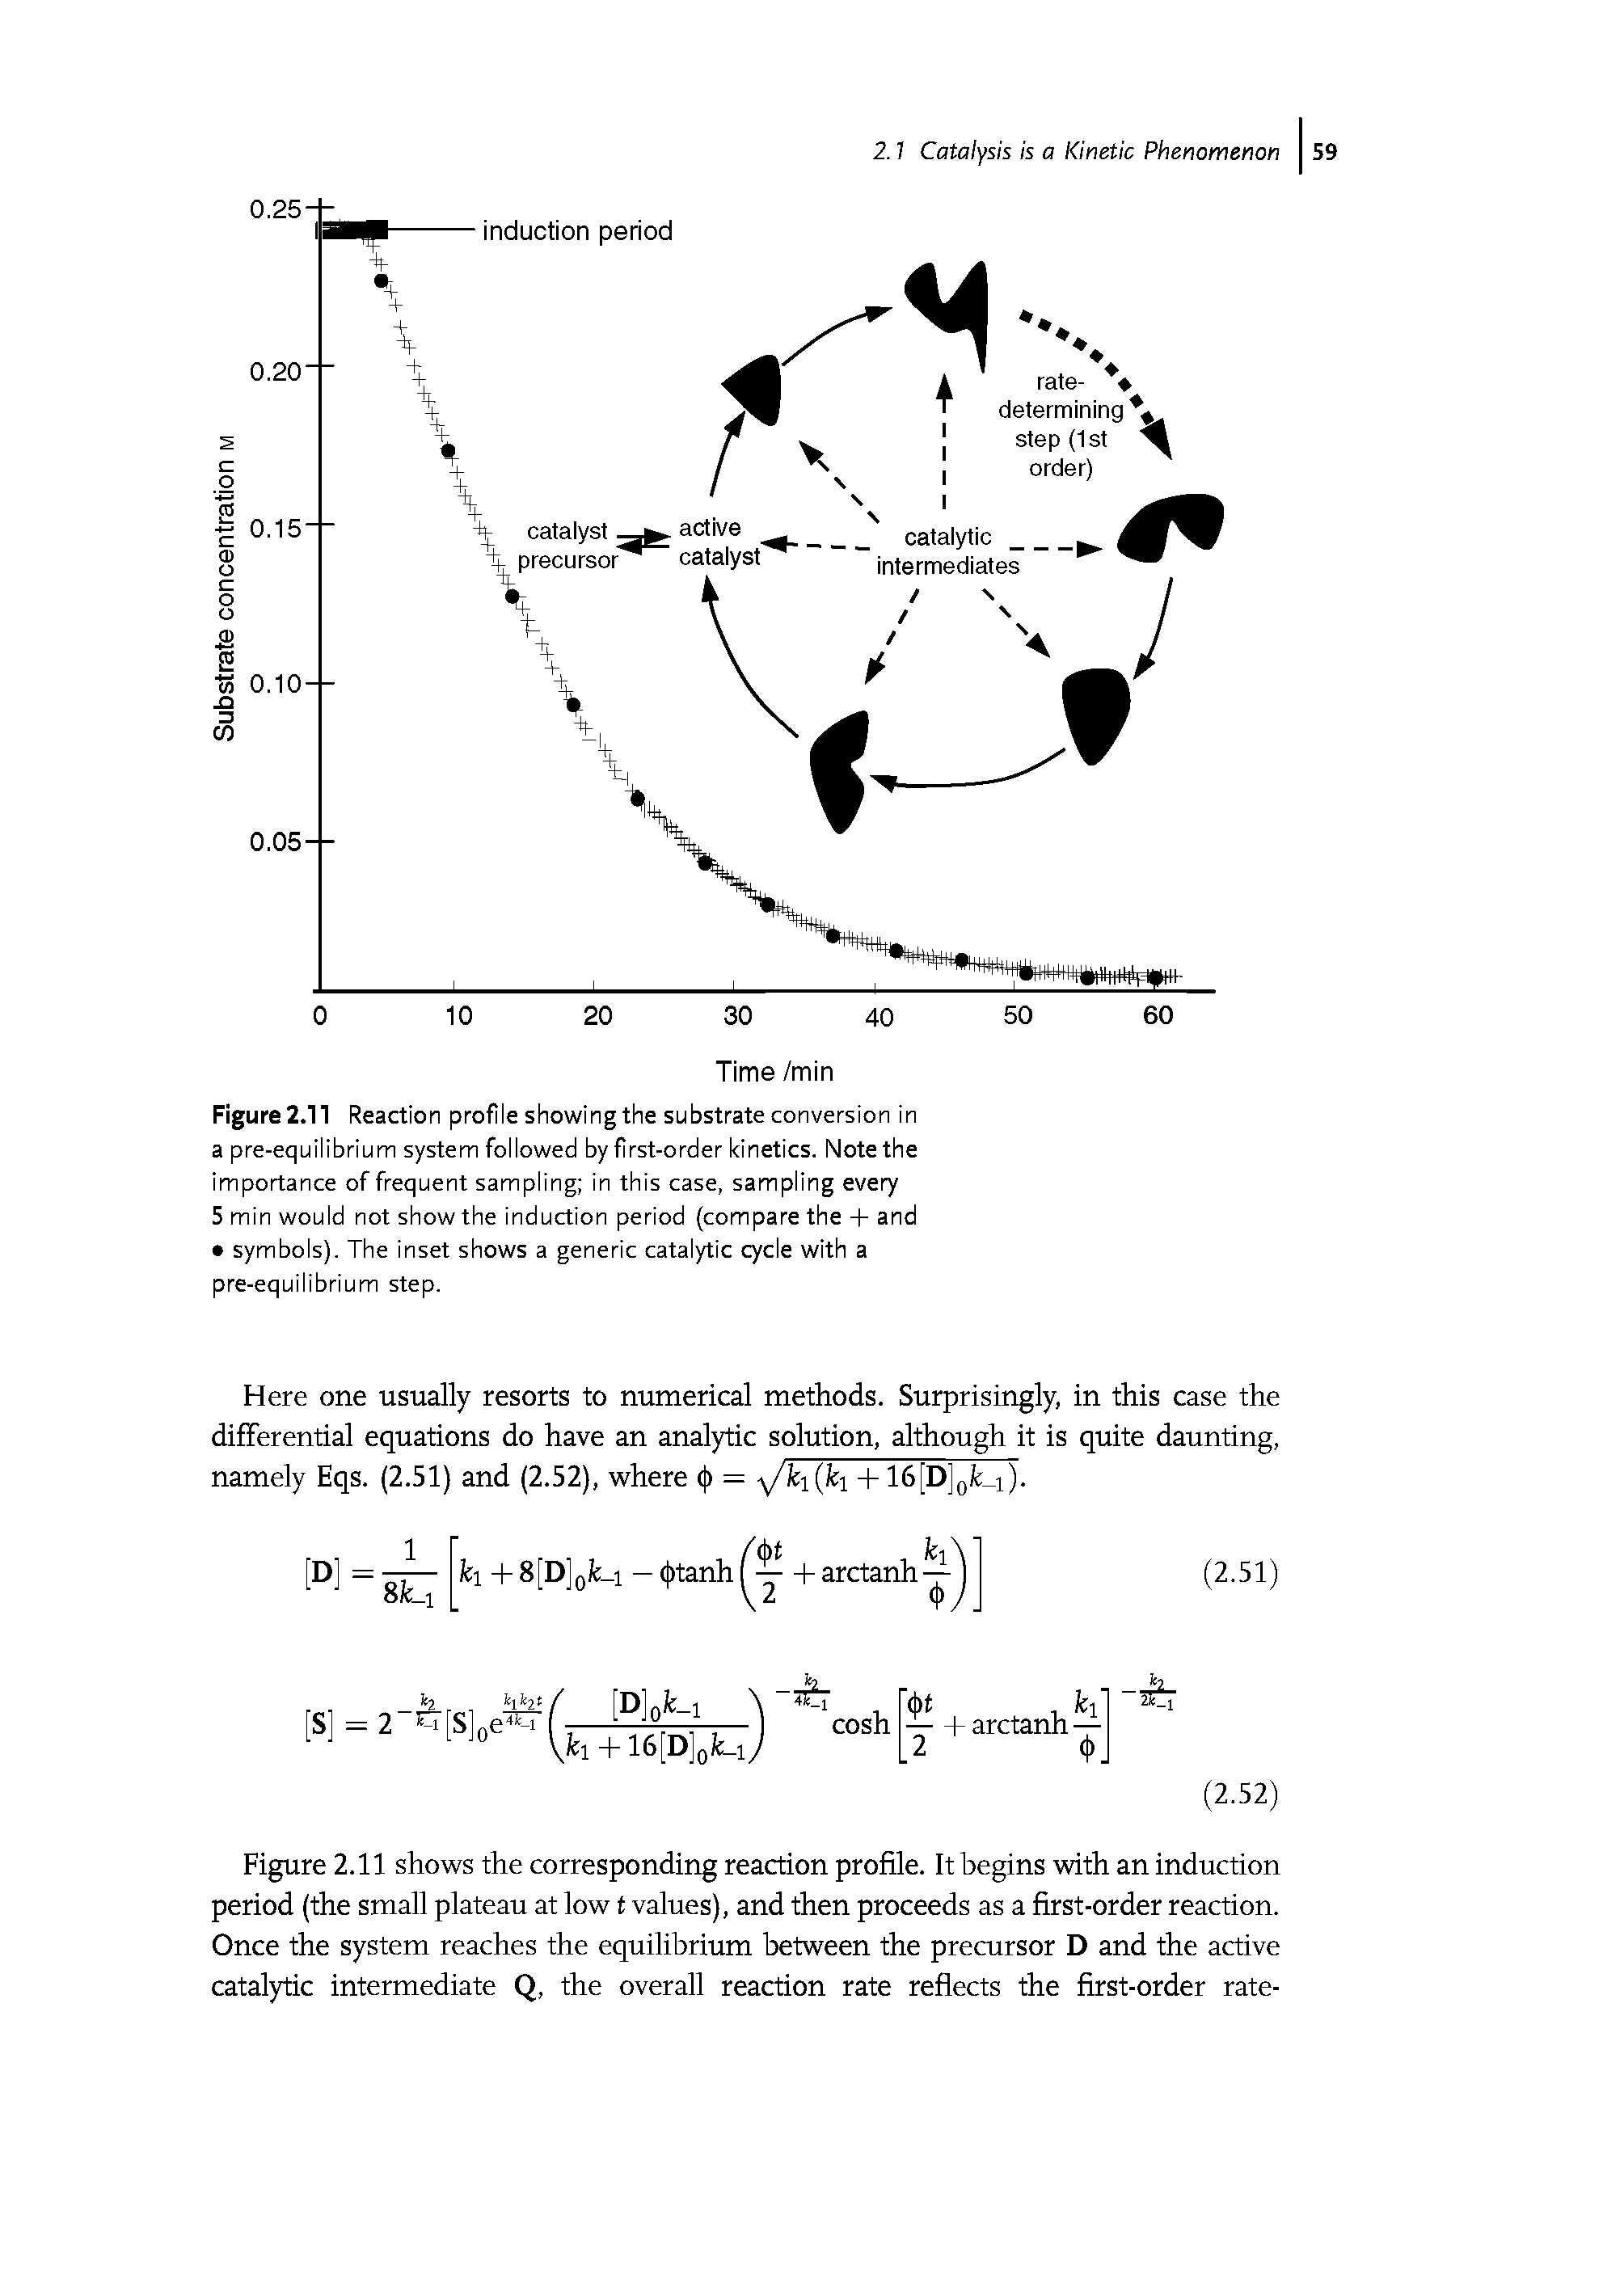 Figure 2.11 Reaction profile showing the substrate conversion in a pre-equilibrium system followed by first-order kinetics. Note the importance of frequent sampling in this case, sampling every 5 min would not show the induction period (compare the + and symbols). The inset shows a generic catalytic cycle with a pre-equilibrium step.